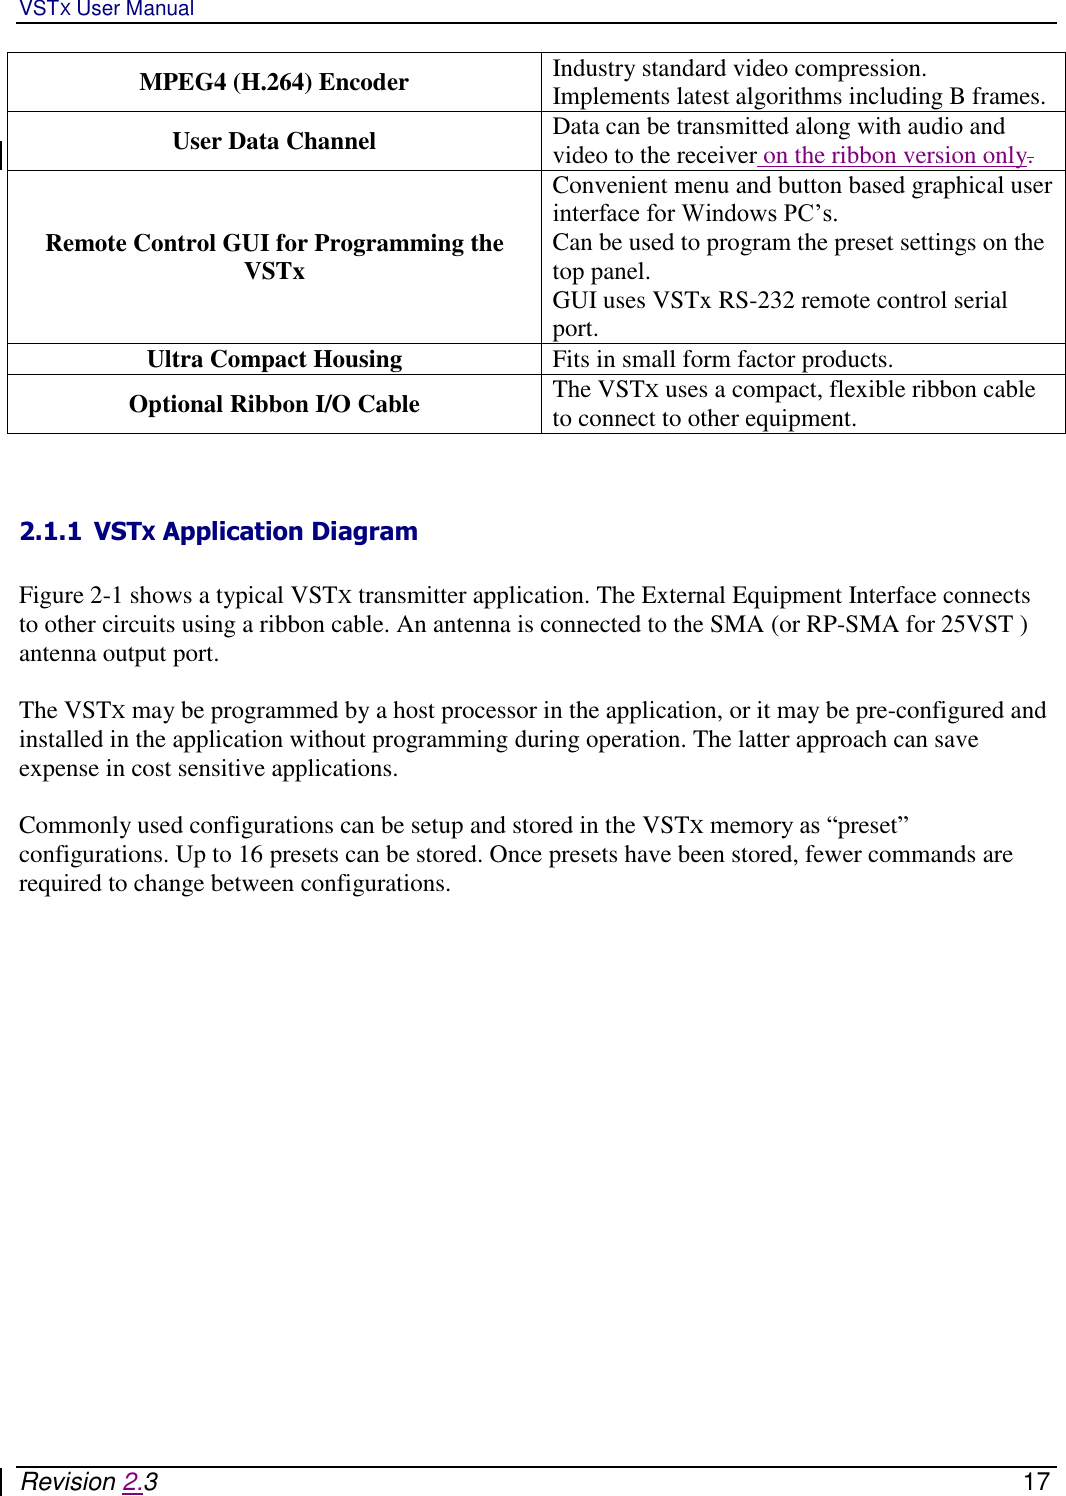 VSTX User Manual   Revision 2.3    17 MPEG4 (H.264) Encoder Industry standard video compression.  Implements latest algorithms including B frames.  User Data Channel Data can be transmitted along with audio and video to the receiver on the ribbon version only.  Remote Control GUI for Programming the VSTx Convenient menu and button based graphical user interface for Windows PC’s.  Can be used to program the preset settings on the top panel. GUI uses VSTx RS-232 remote control serial port. Ultra Compact Housing Fits in small form factor products.  Optional Ribbon I/O Cable The VSTX uses a compact, flexible ribbon cable to connect to other equipment.    2.1.1 VSTX Application Diagram  Figure 2-1 shows a typical VSTX transmitter application. The External Equipment Interface connects to other circuits using a ribbon cable. An antenna is connected to the SMA (or RP-SMA for 25VST ) antenna output port.   The VSTX may be programmed by a host processor in the application, or it may be pre-configured and installed in the application without programming during operation. The latter approach can save expense in cost sensitive applications.   Commonly used configurations can be setup and stored in the VSTX memory as “preset” configurations. Up to 16 presets can be stored. Once presets have been stored, fewer commands are required to change between configurations.    